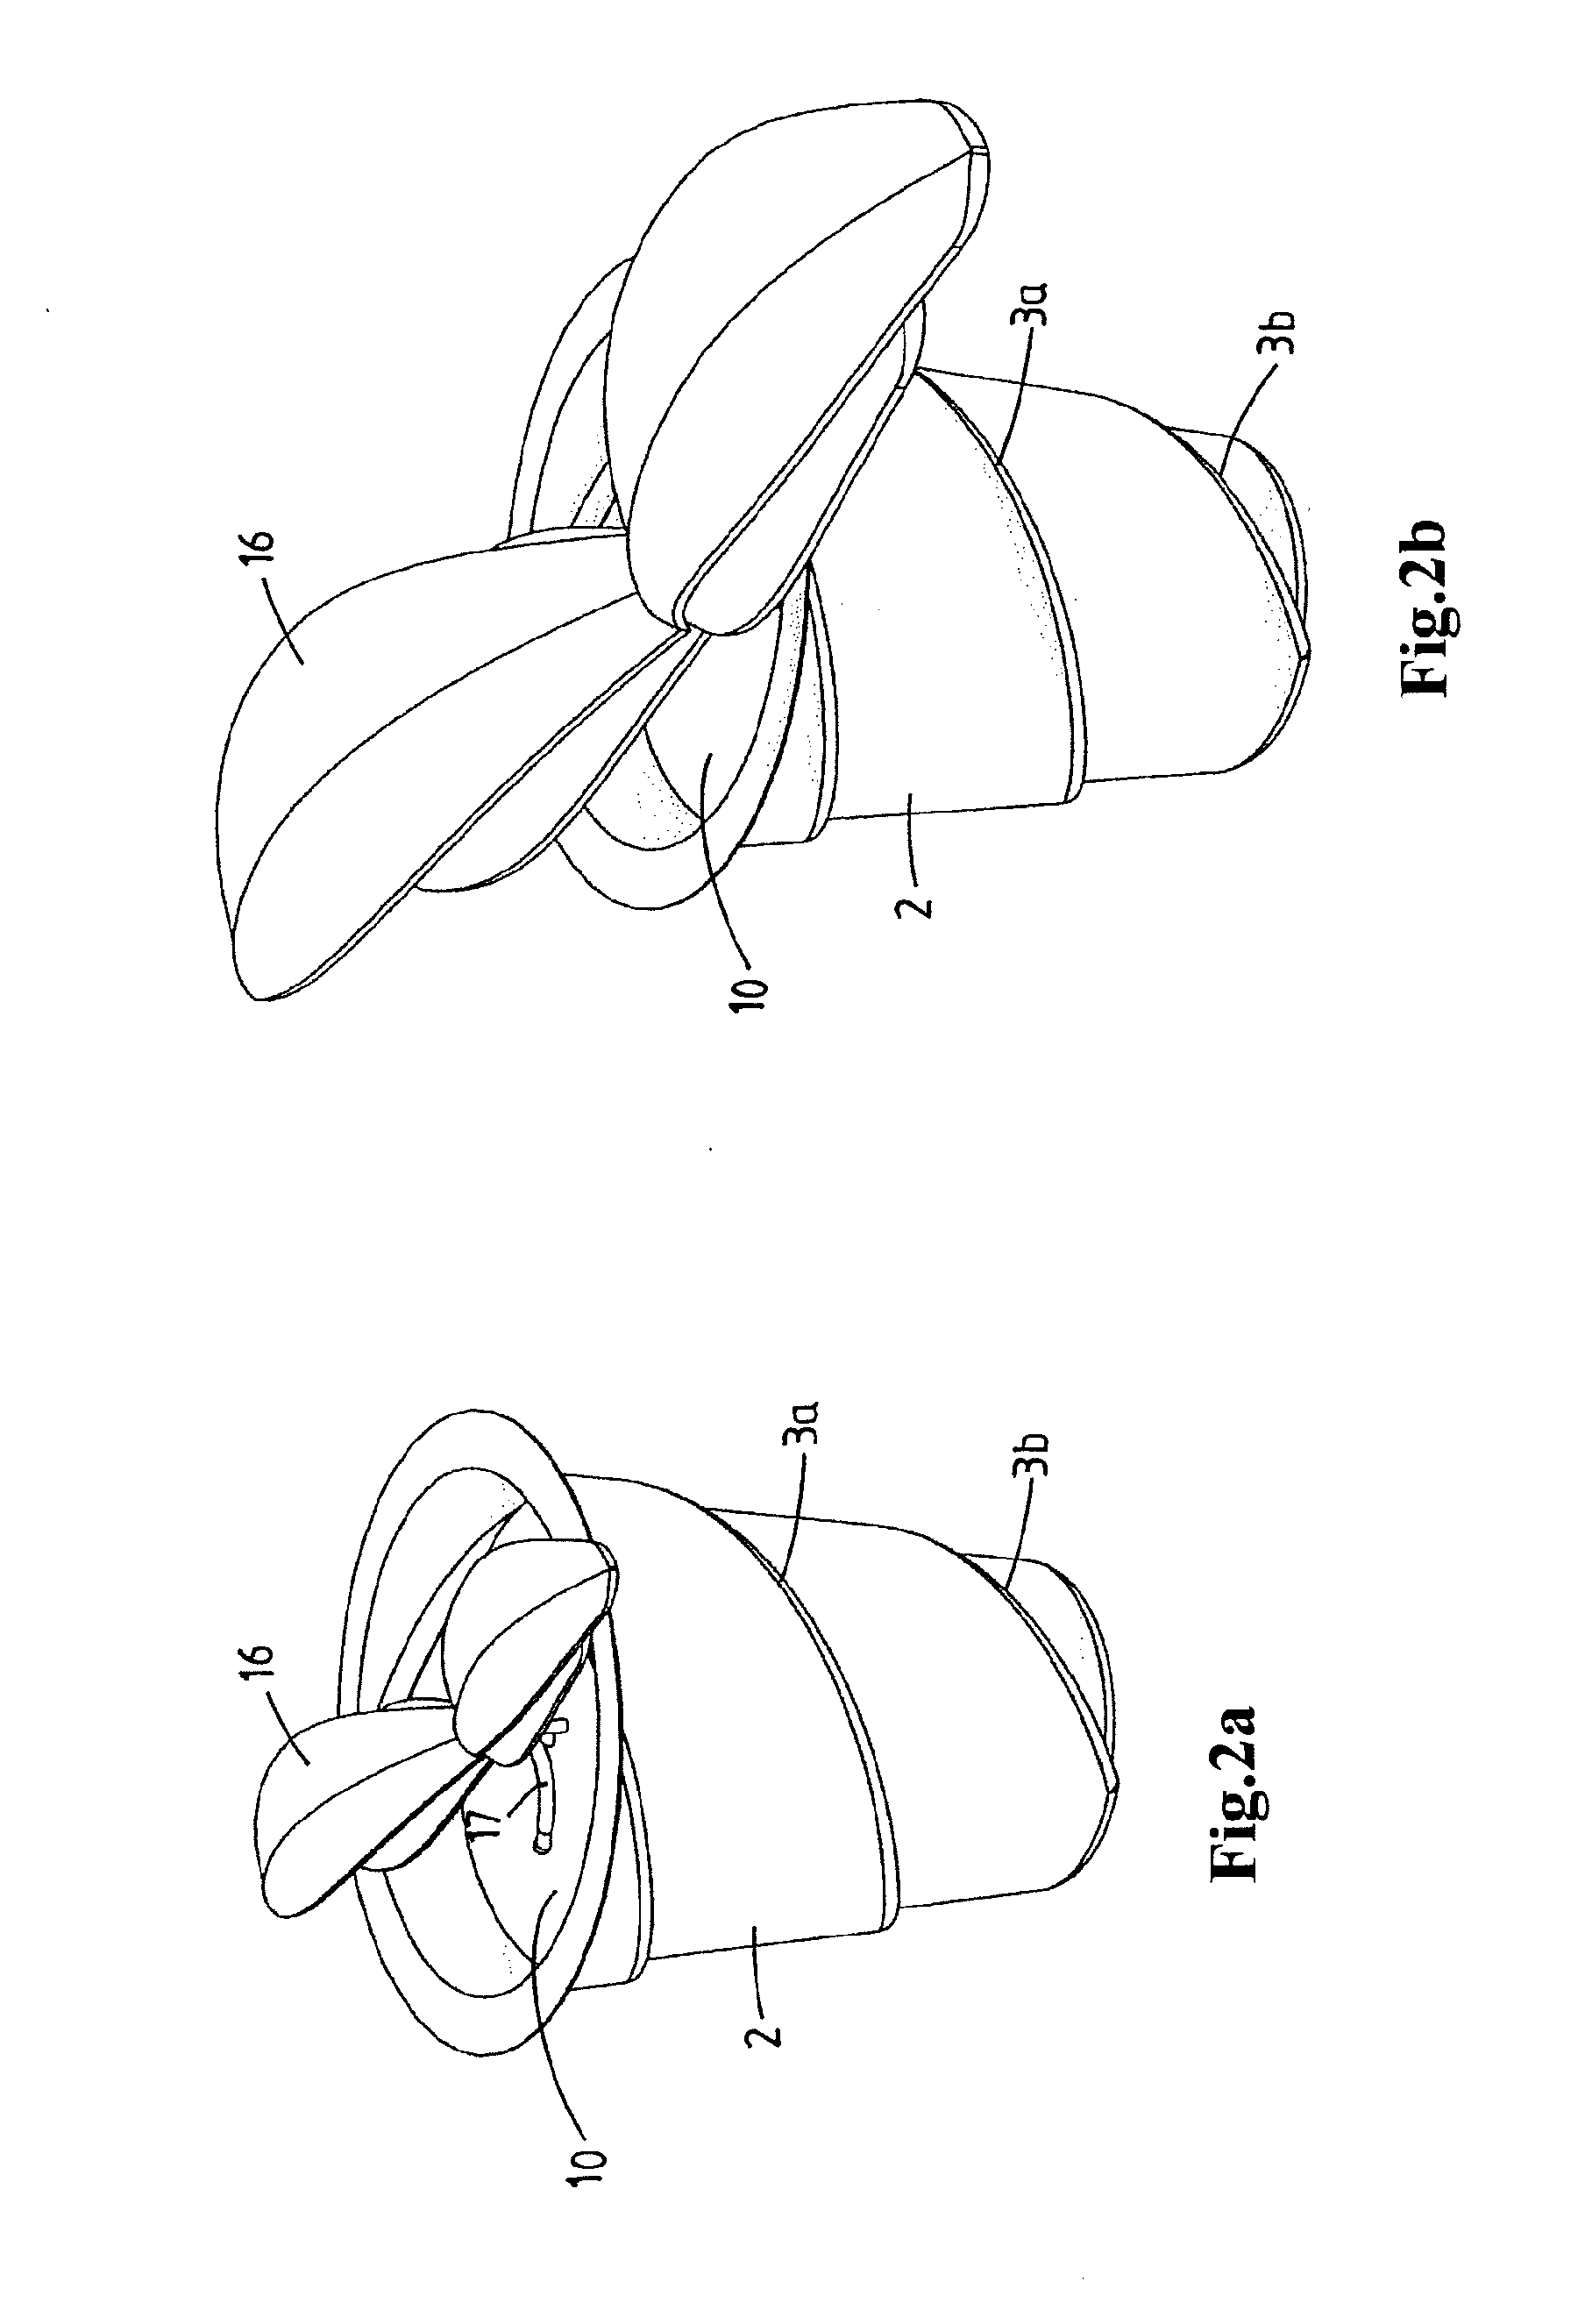 Epiphyte growing system with a spirally downwardly extending groove-shaped space